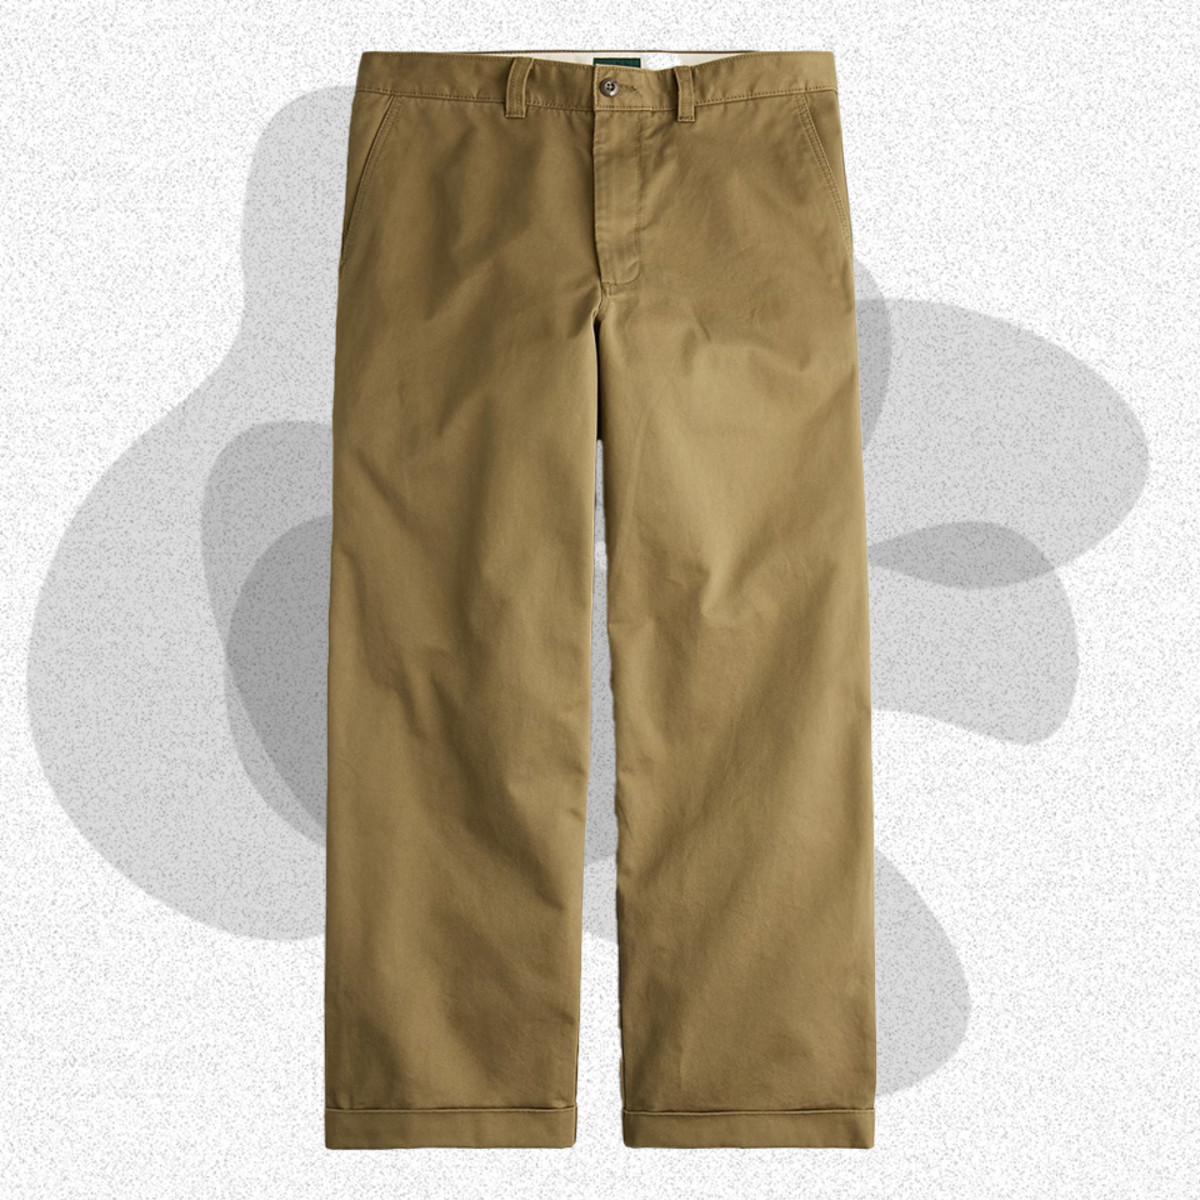 jcrew giant fit chino pant